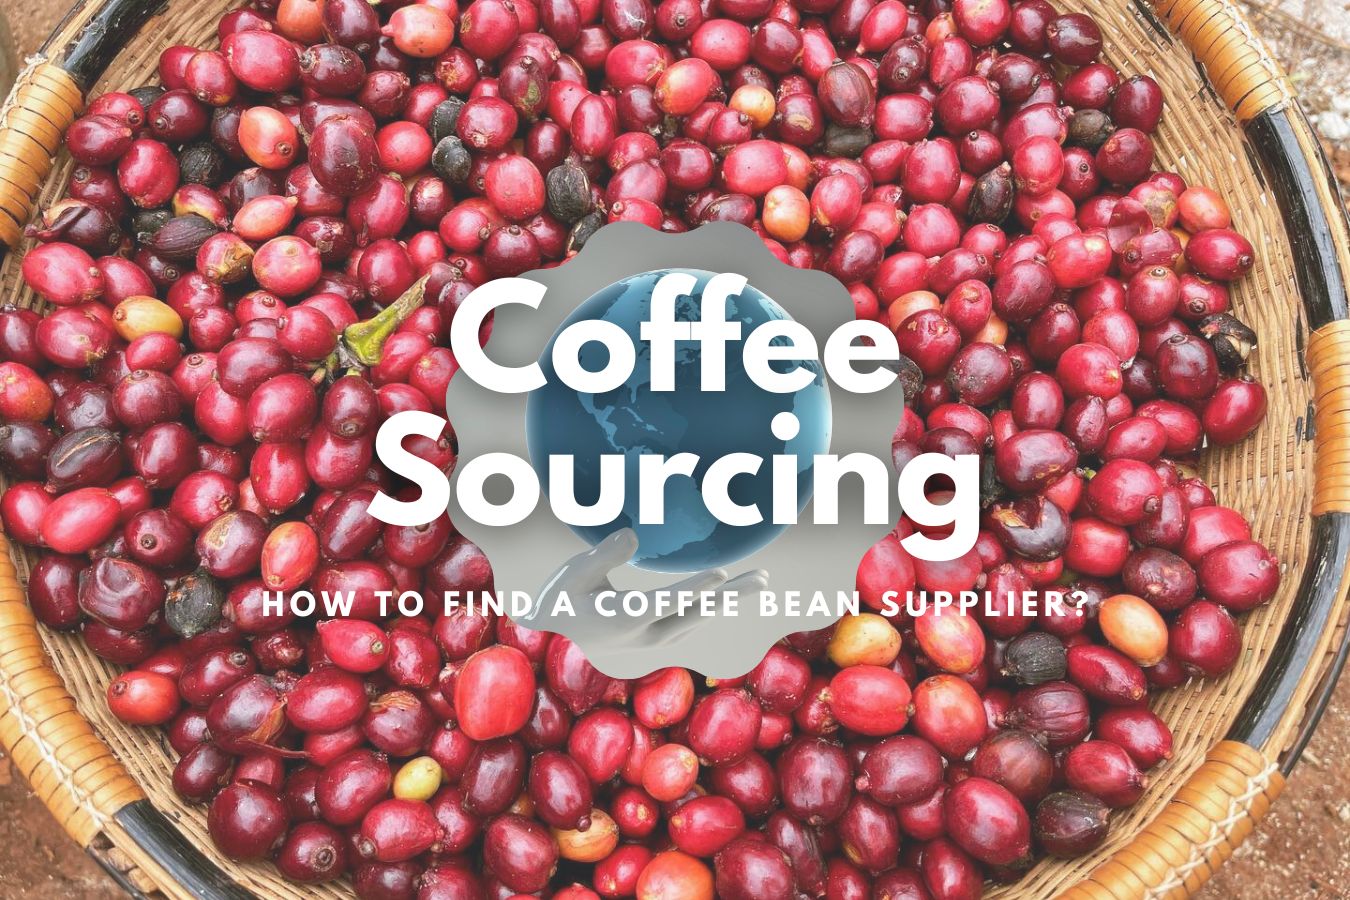 Coffee Sourcing How To Find A Coffee Bean Supplier